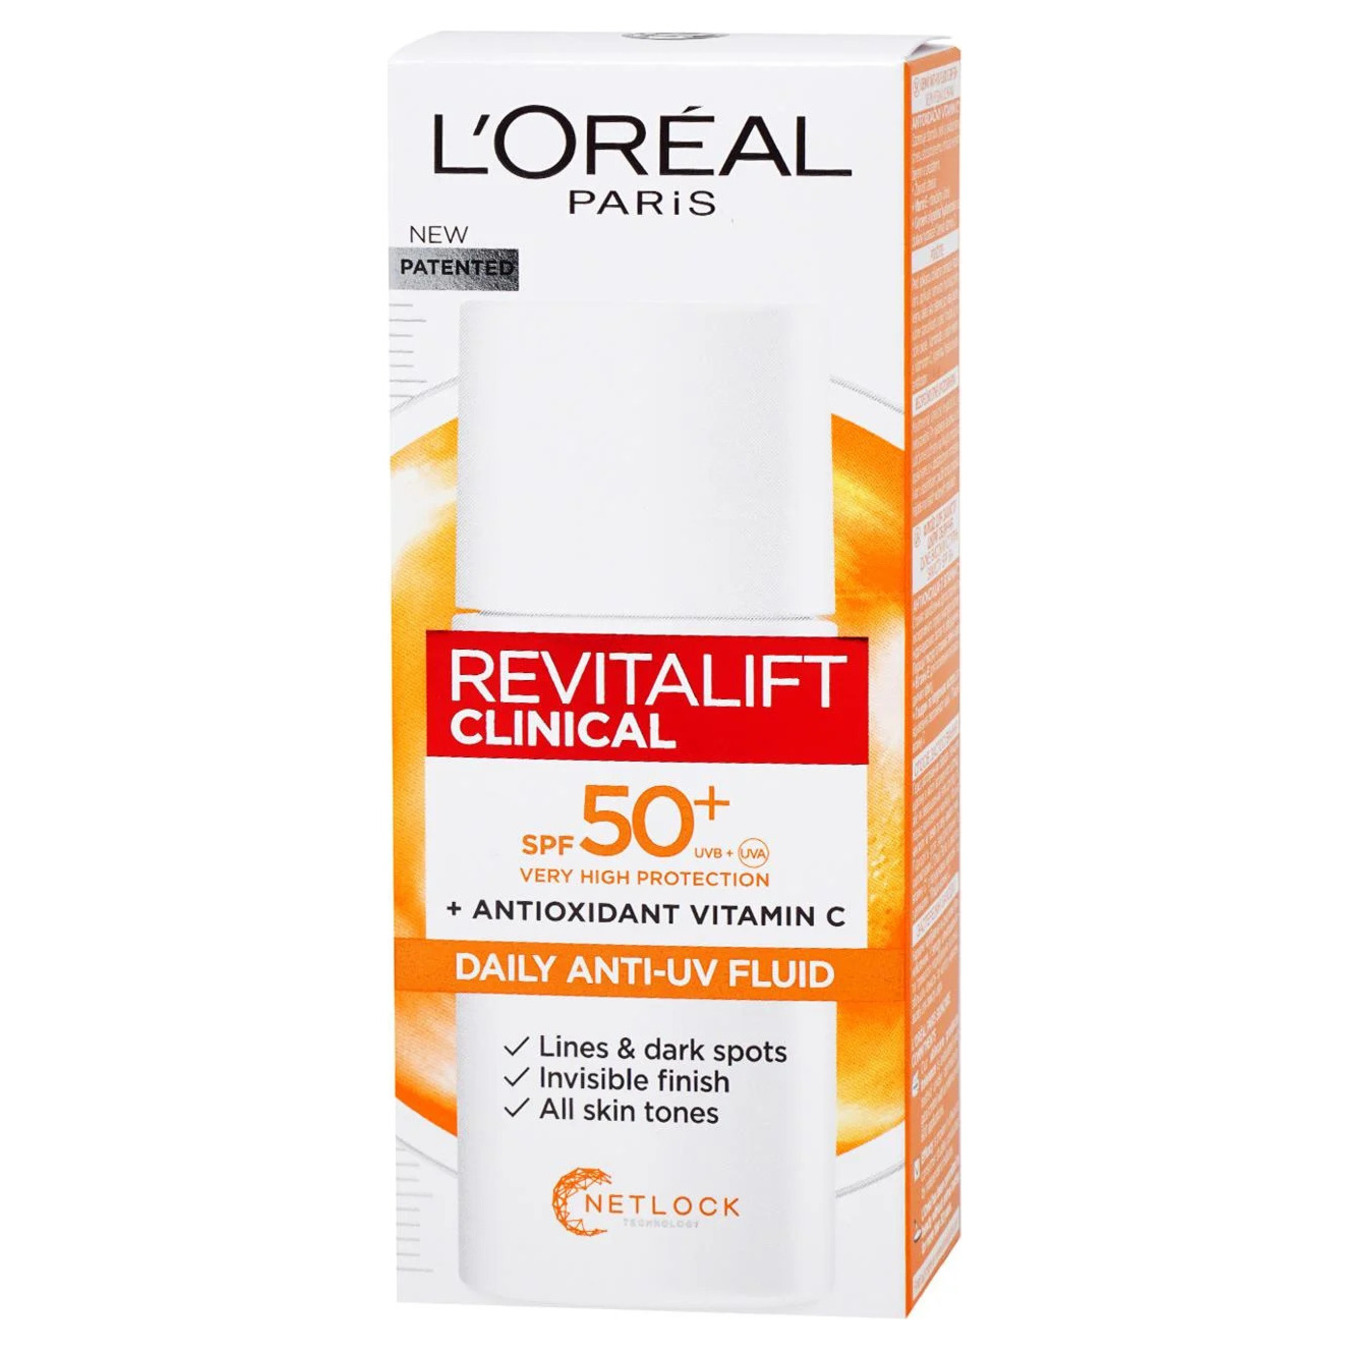 Fluid L'Oreal Revitalift SPF 50+ clinical vitamin C for the face 50 ml